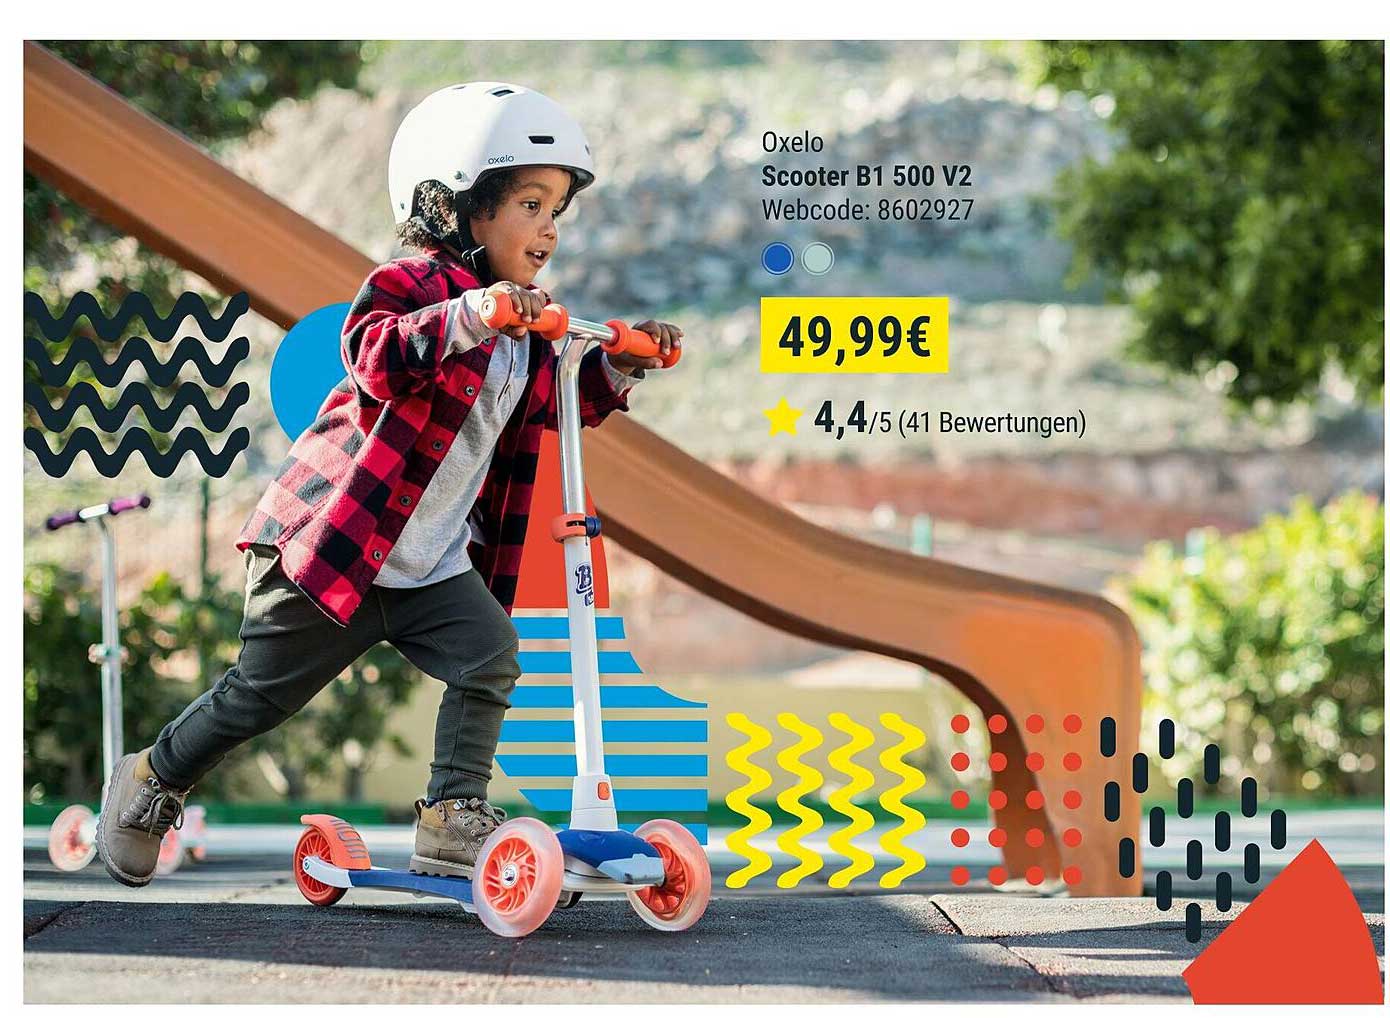 Oxelo Scooter B1 Angebot bei Decathlon